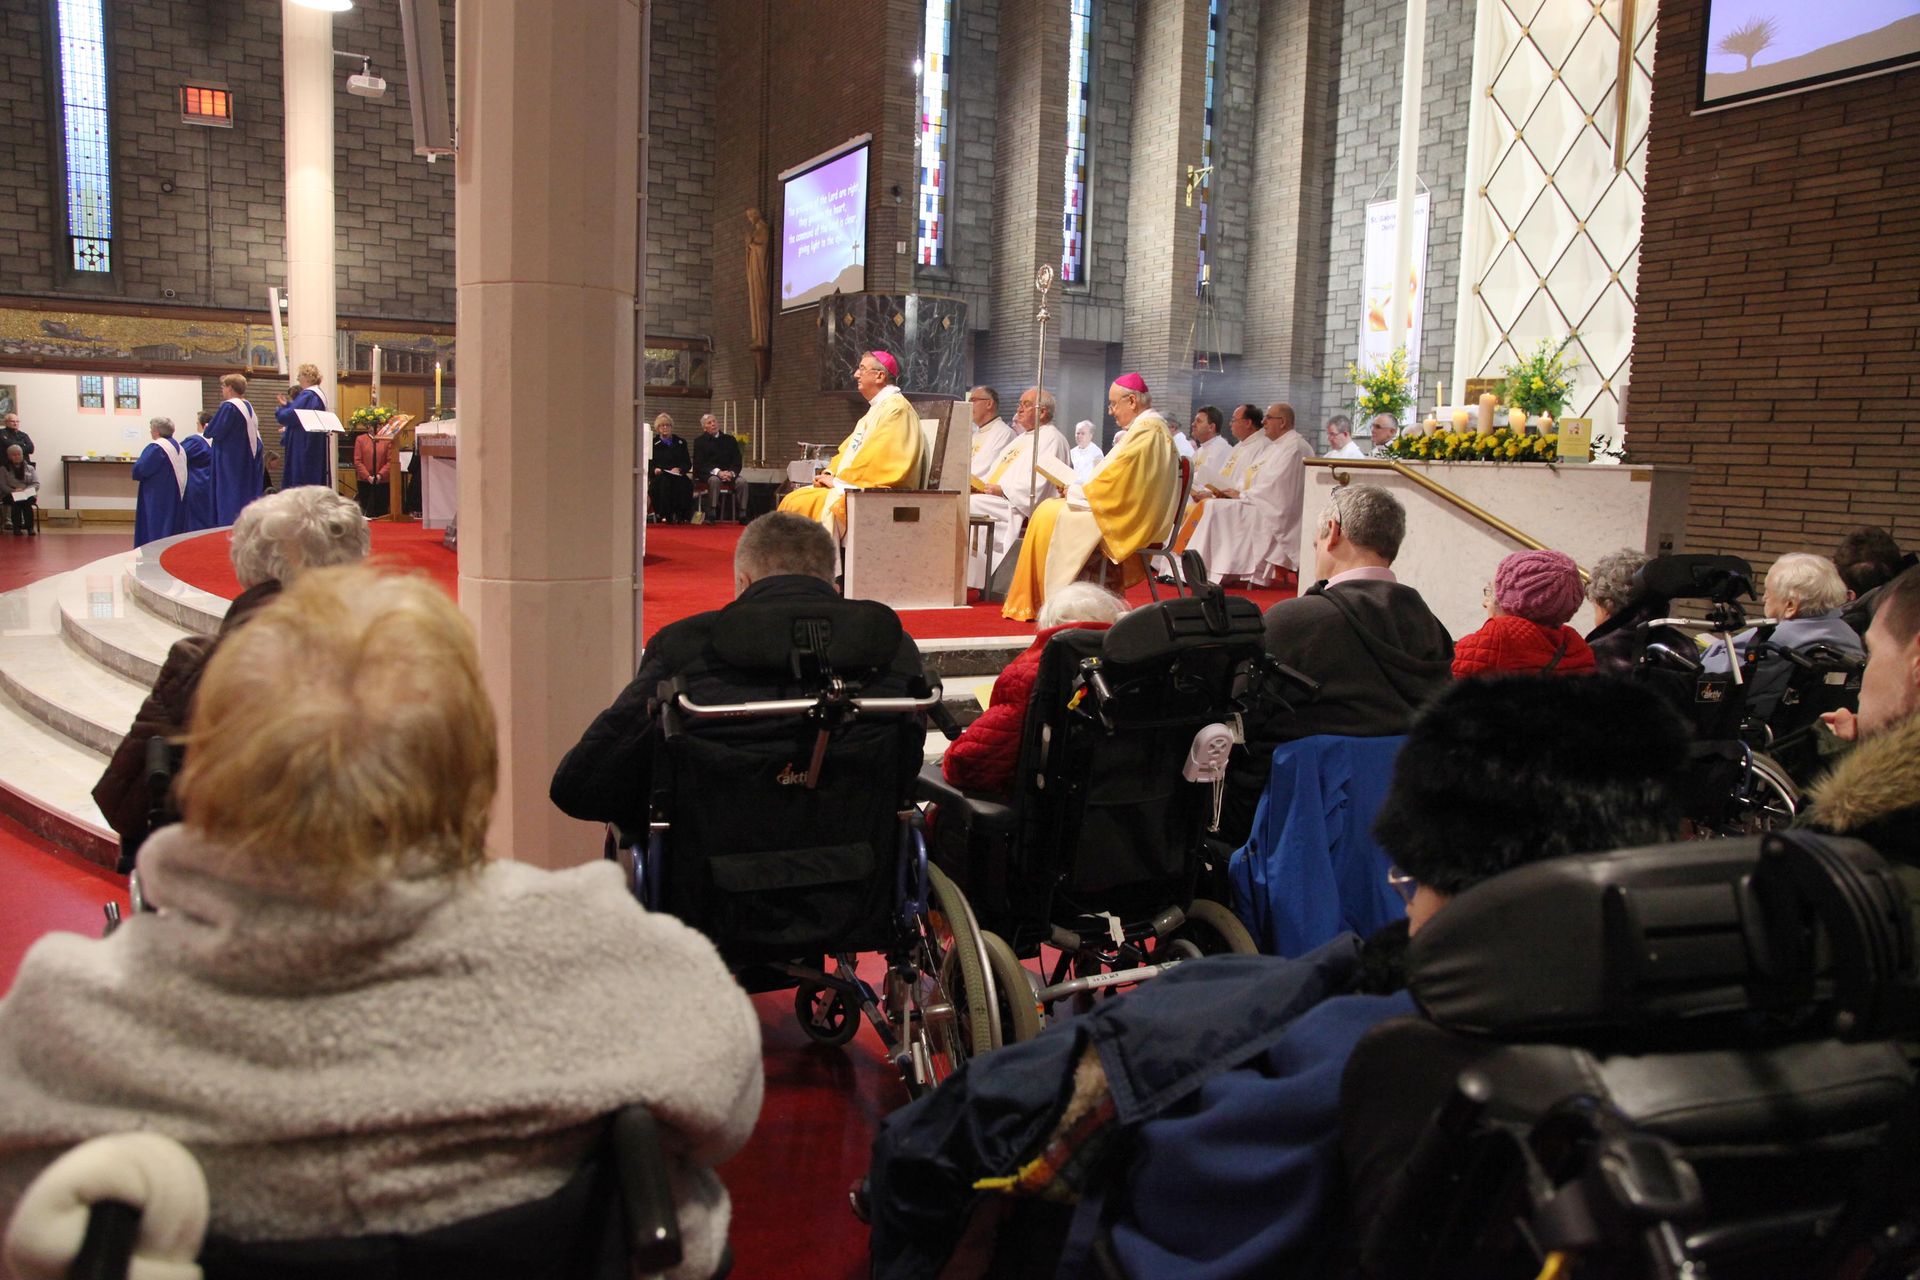 A group of people in wheelchairs are sitting in a church